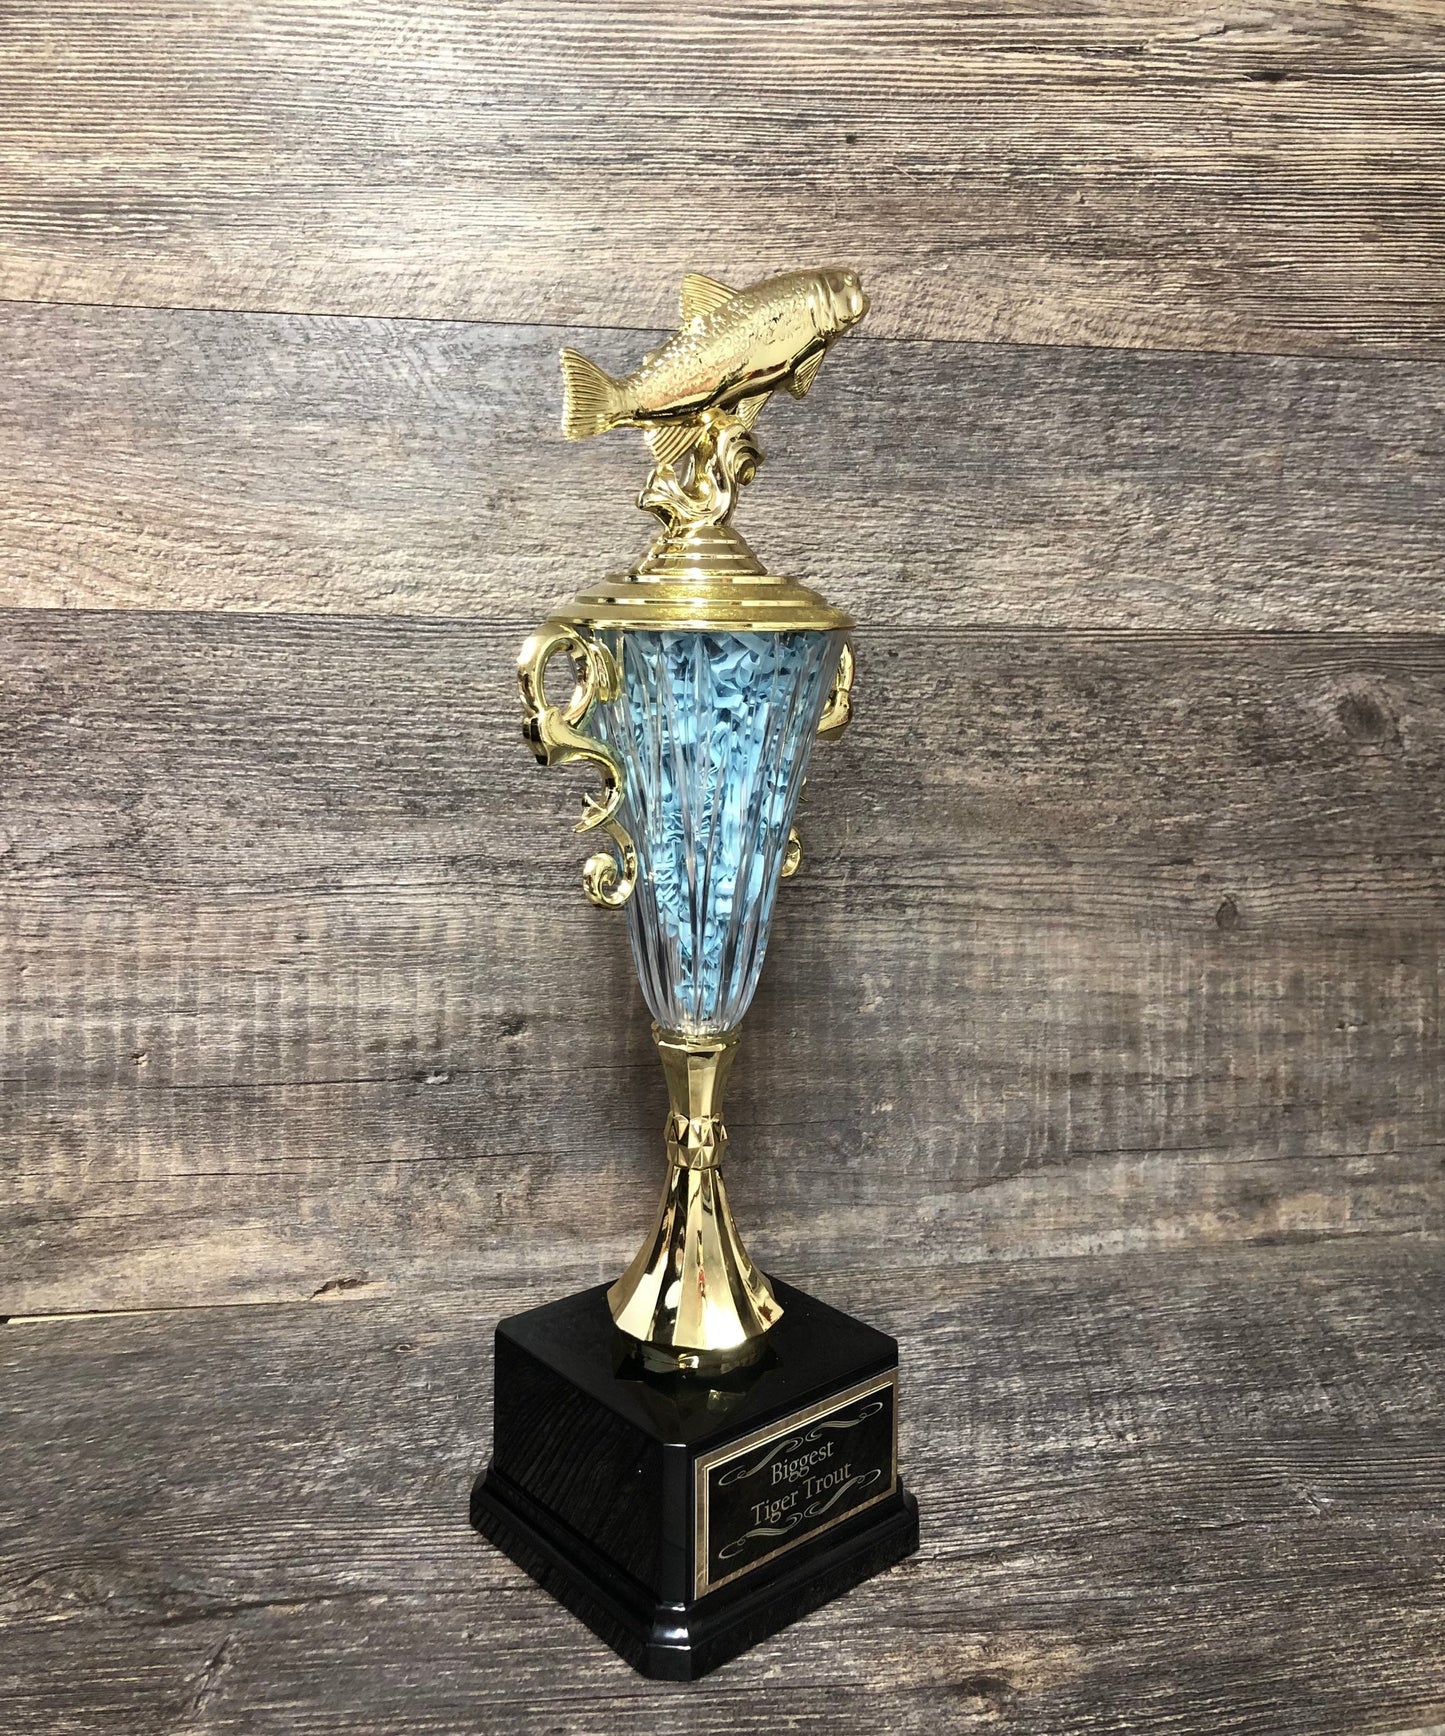 Fishing Trophy Fishing Derby Tournament Trophy Award Biggest Bass Biggest Trout Fish Personalized Trophy Biggest Fish Competition Winner